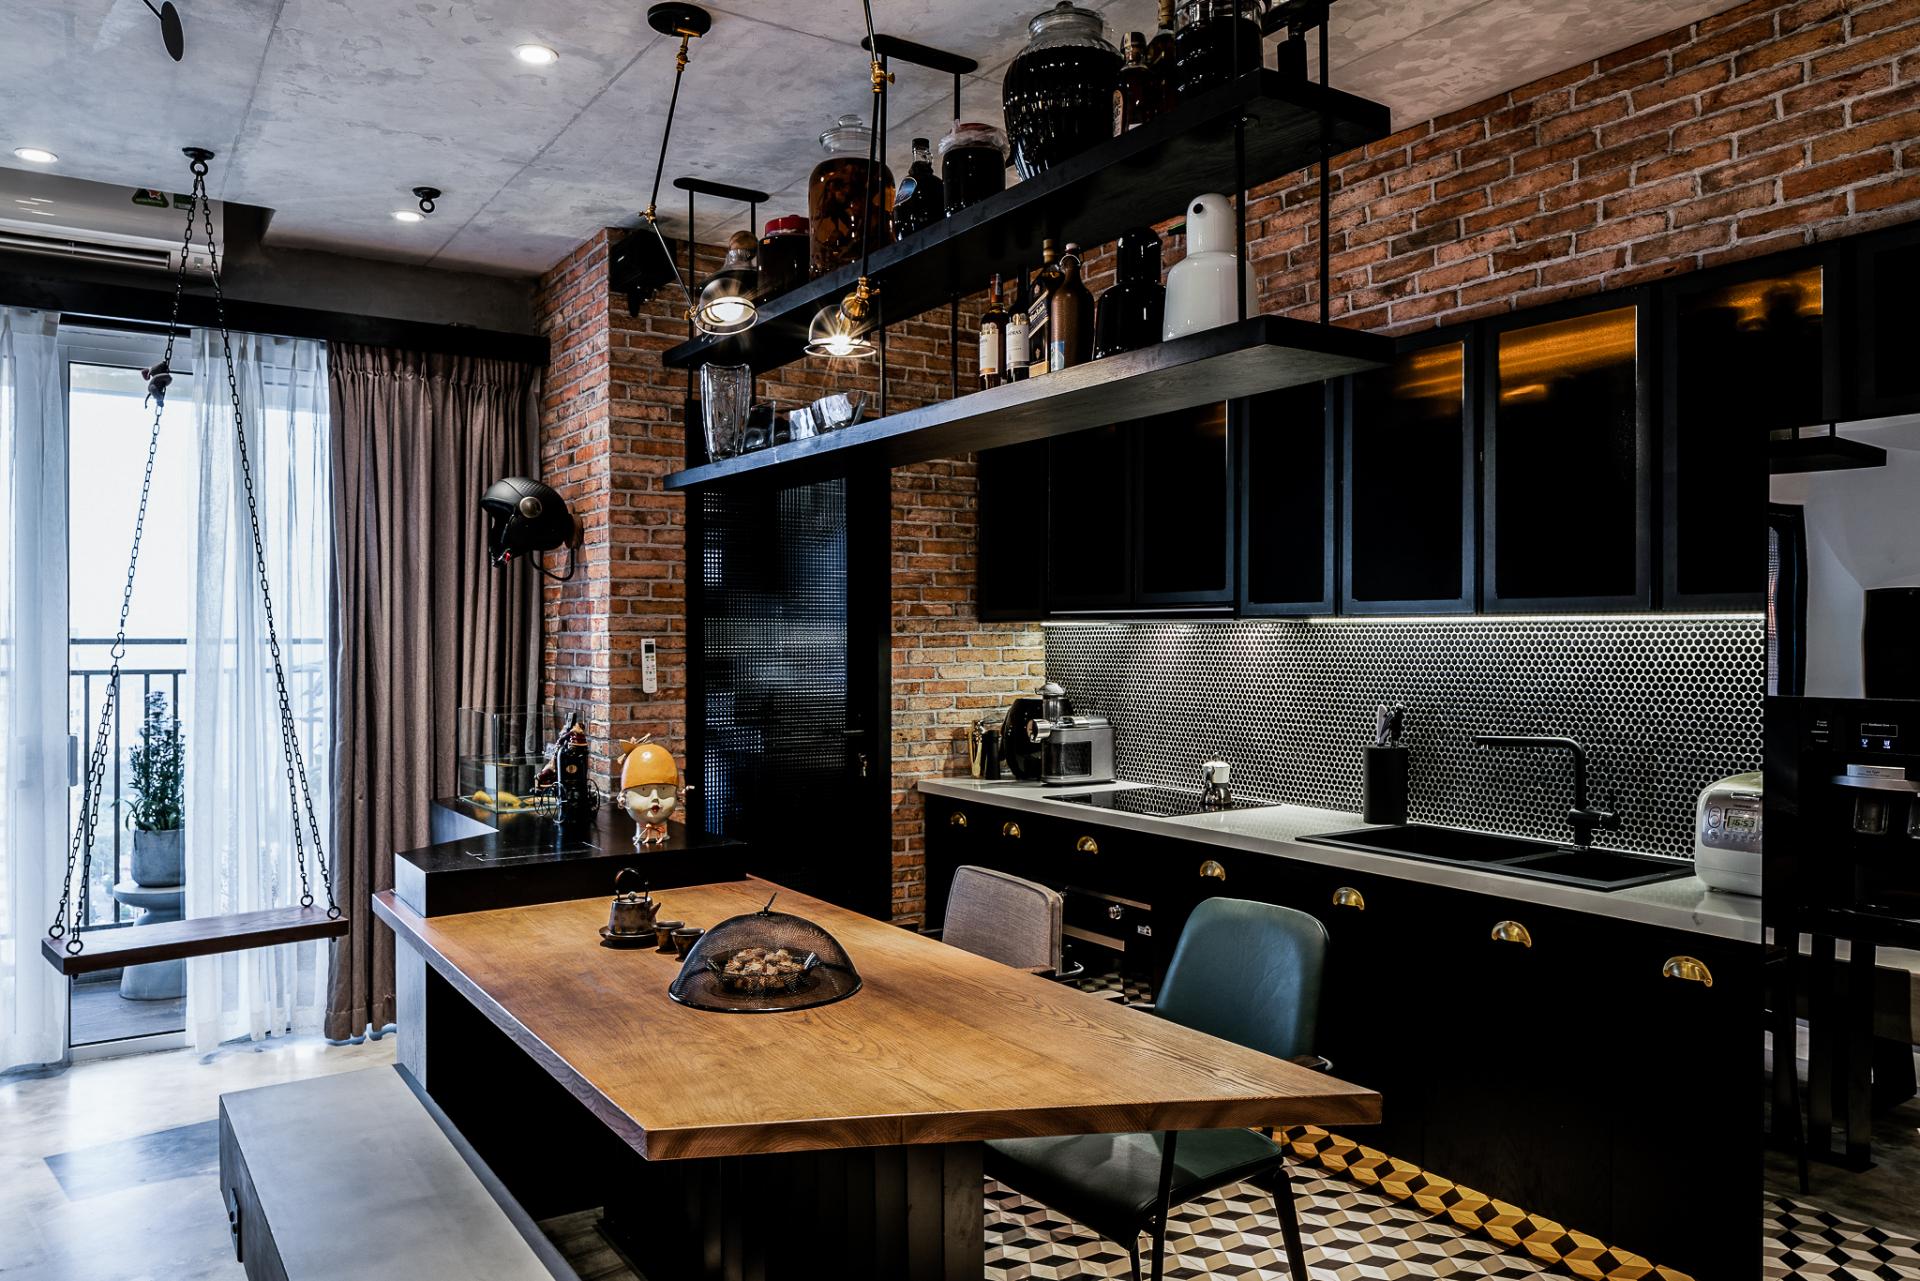 This 1,076 sq. ft. apartment has an industrial accent and a rustic 